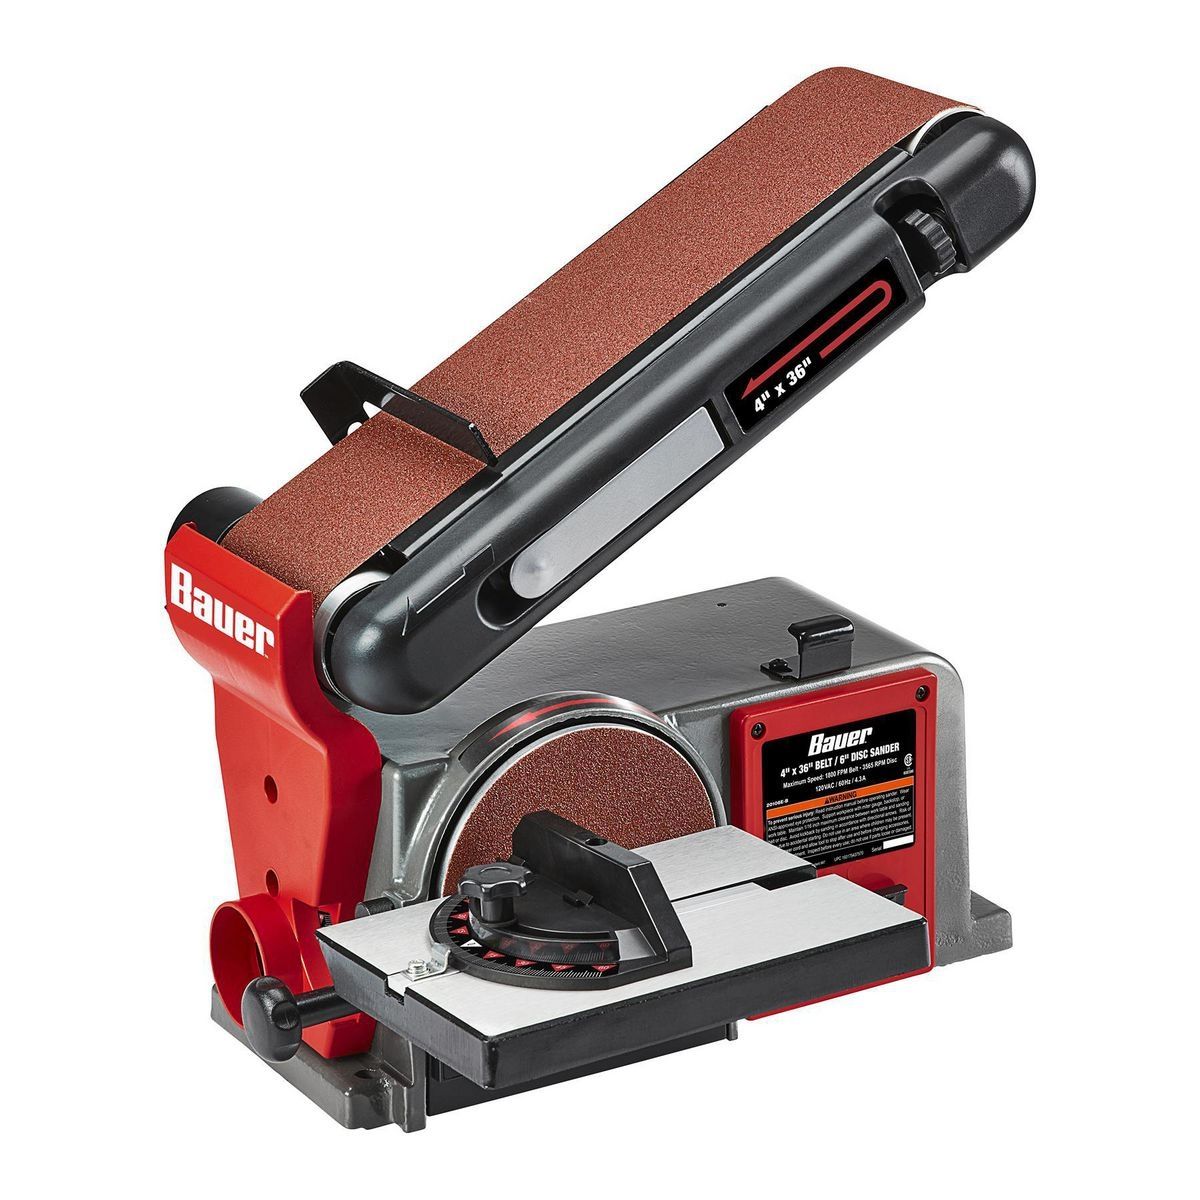 BAUER 4 in. x 36 in. Belt and 6 in. Disc Sander